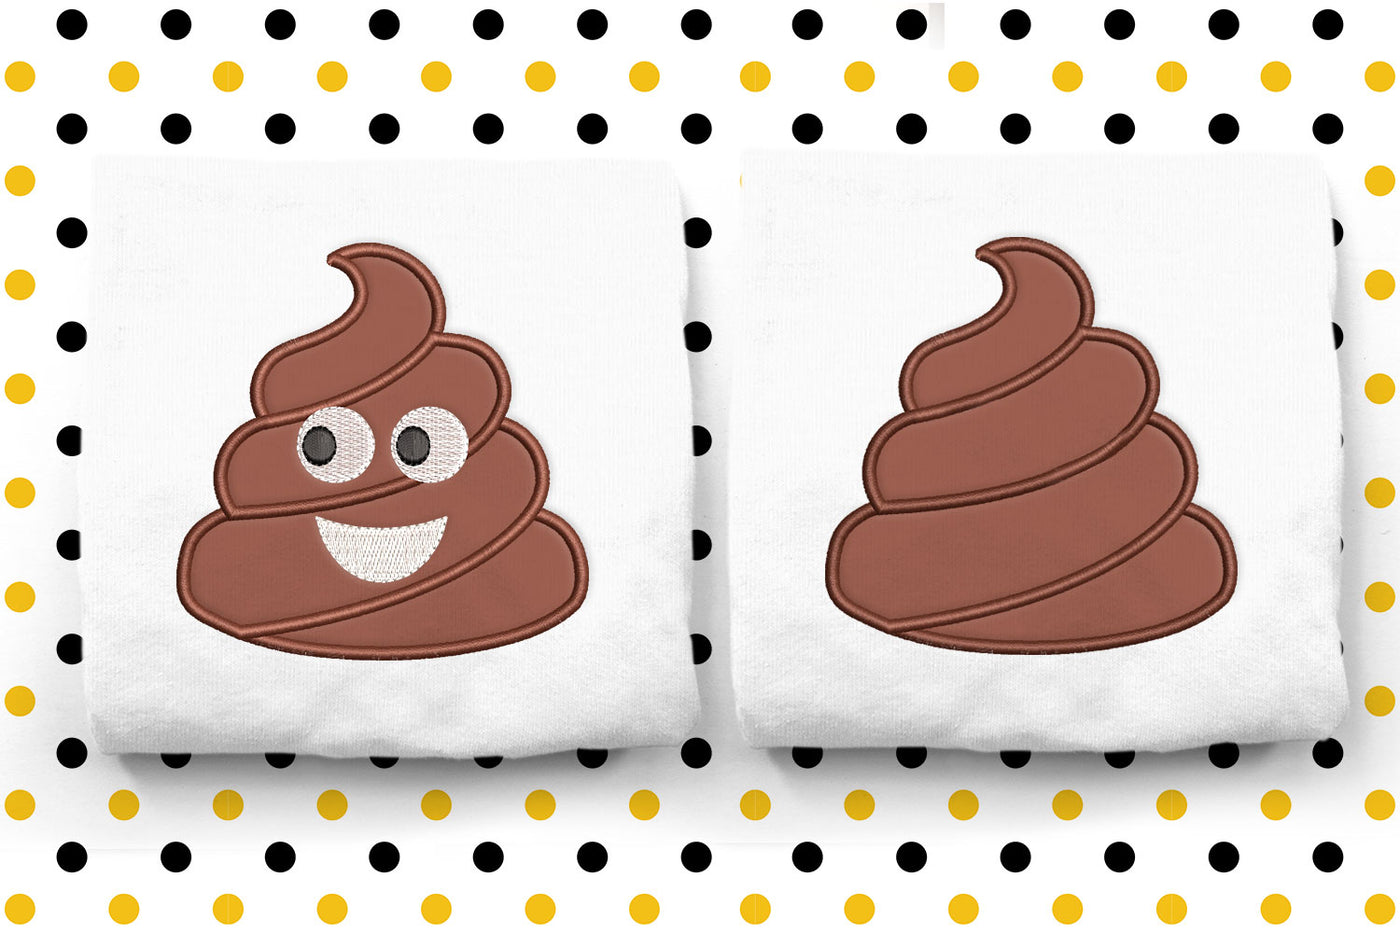 Poop emoji applique embroidery design shwon both with and without a cartoon face